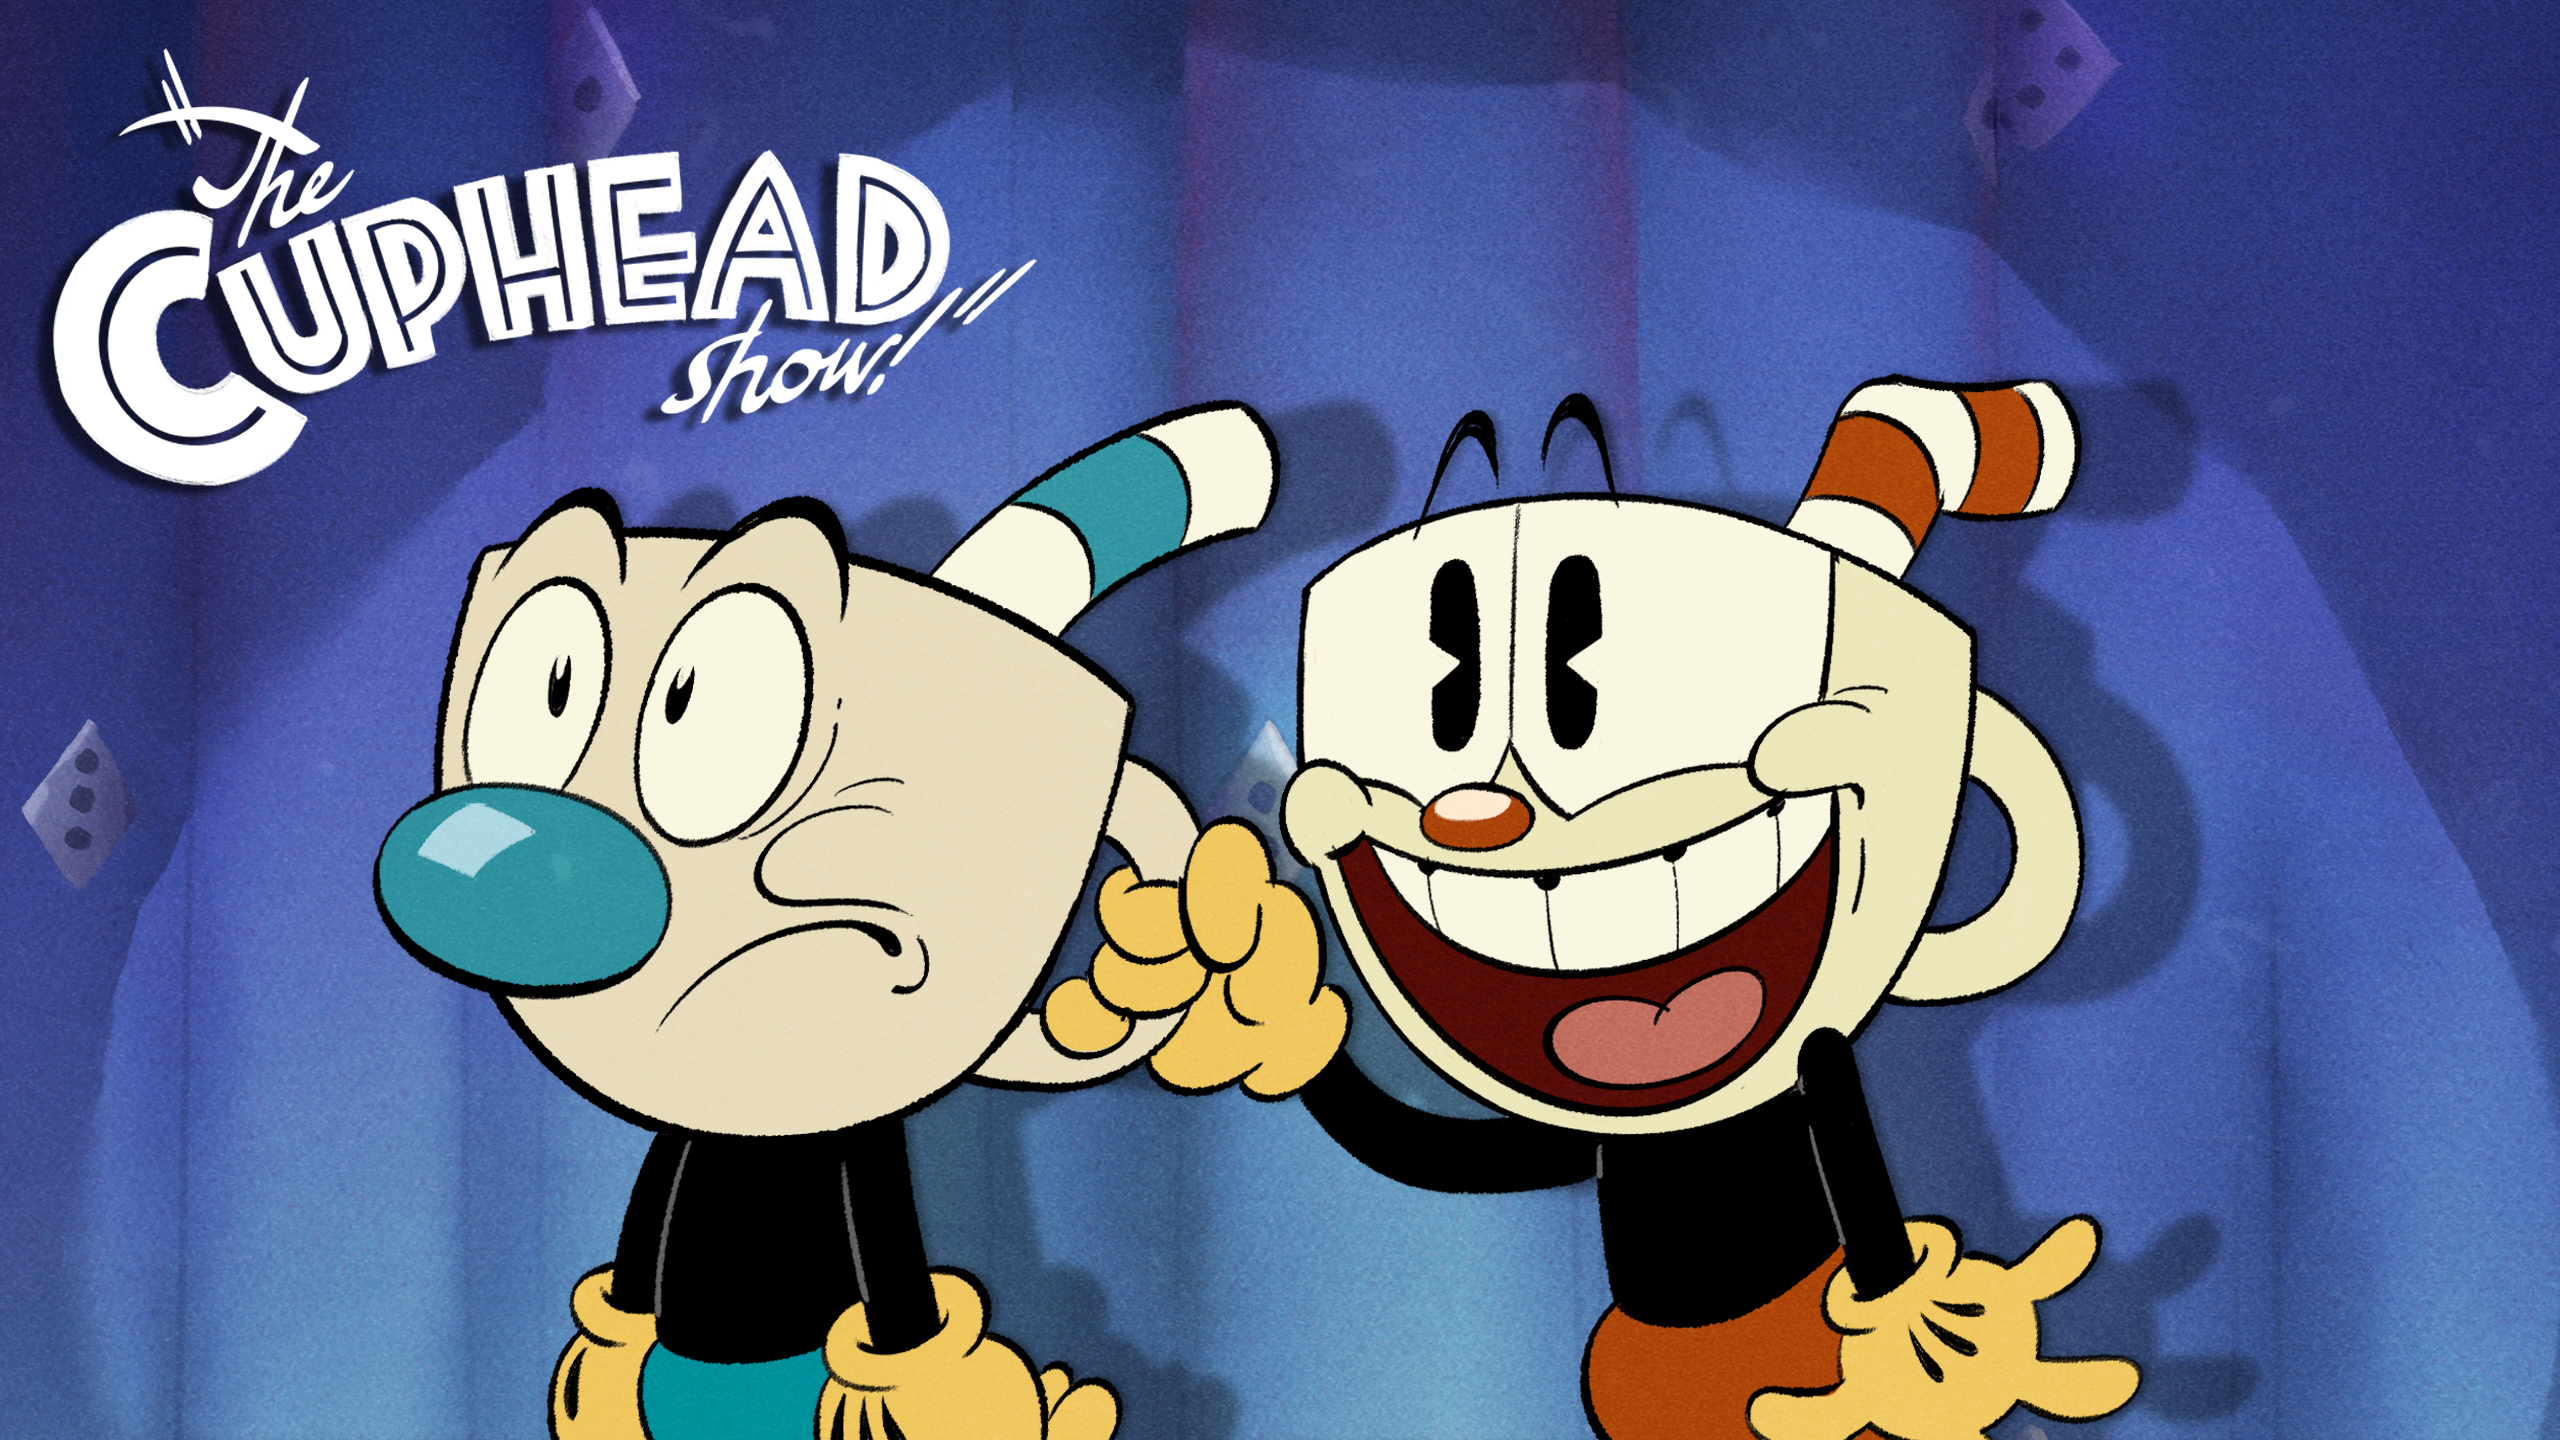 TV Show The Cuphead Show! HD Wallpaper | Background Image